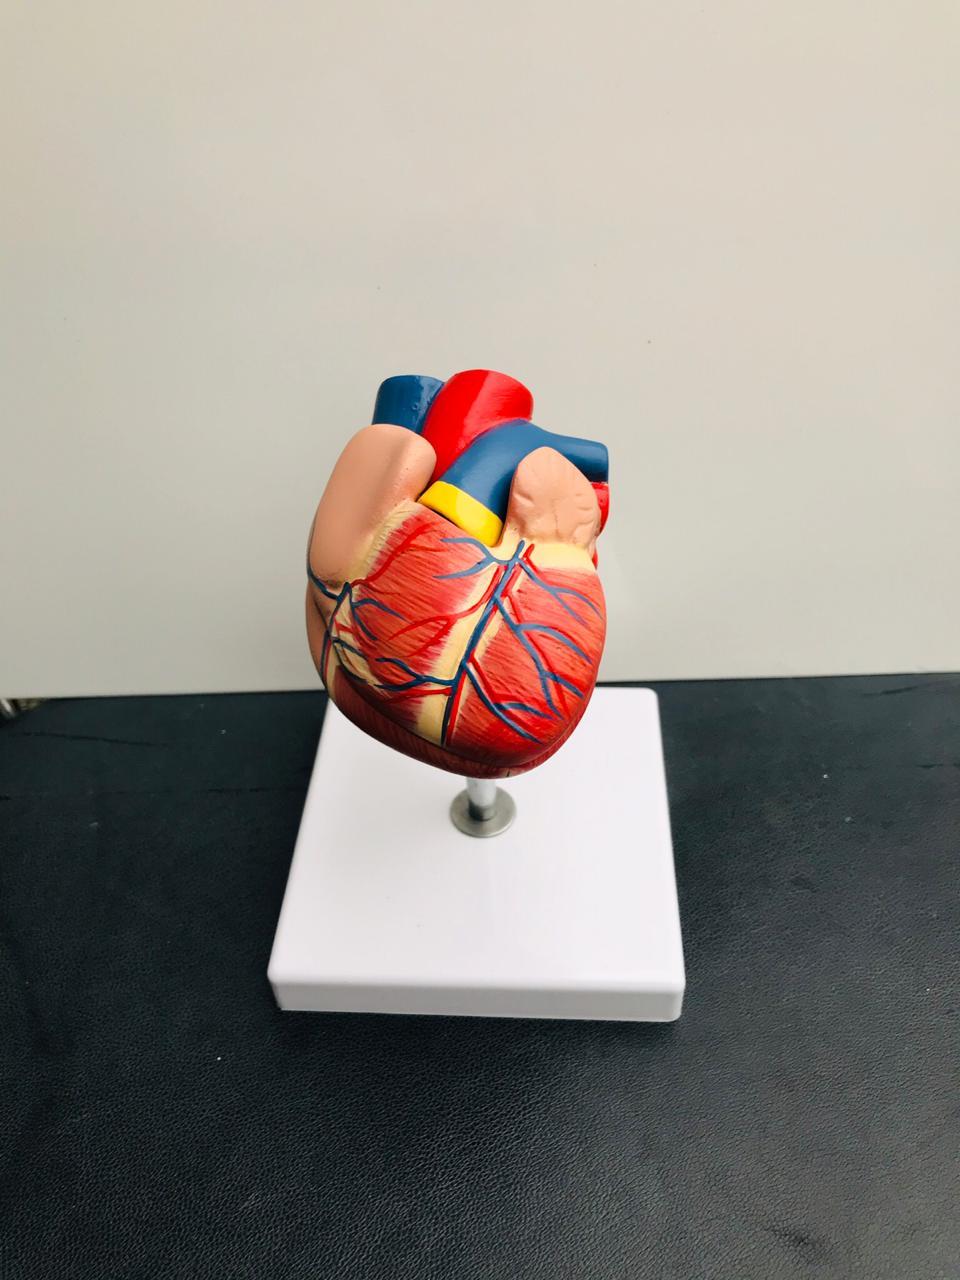 ANM/GNM/Bsc nursing anatomical models and instruments